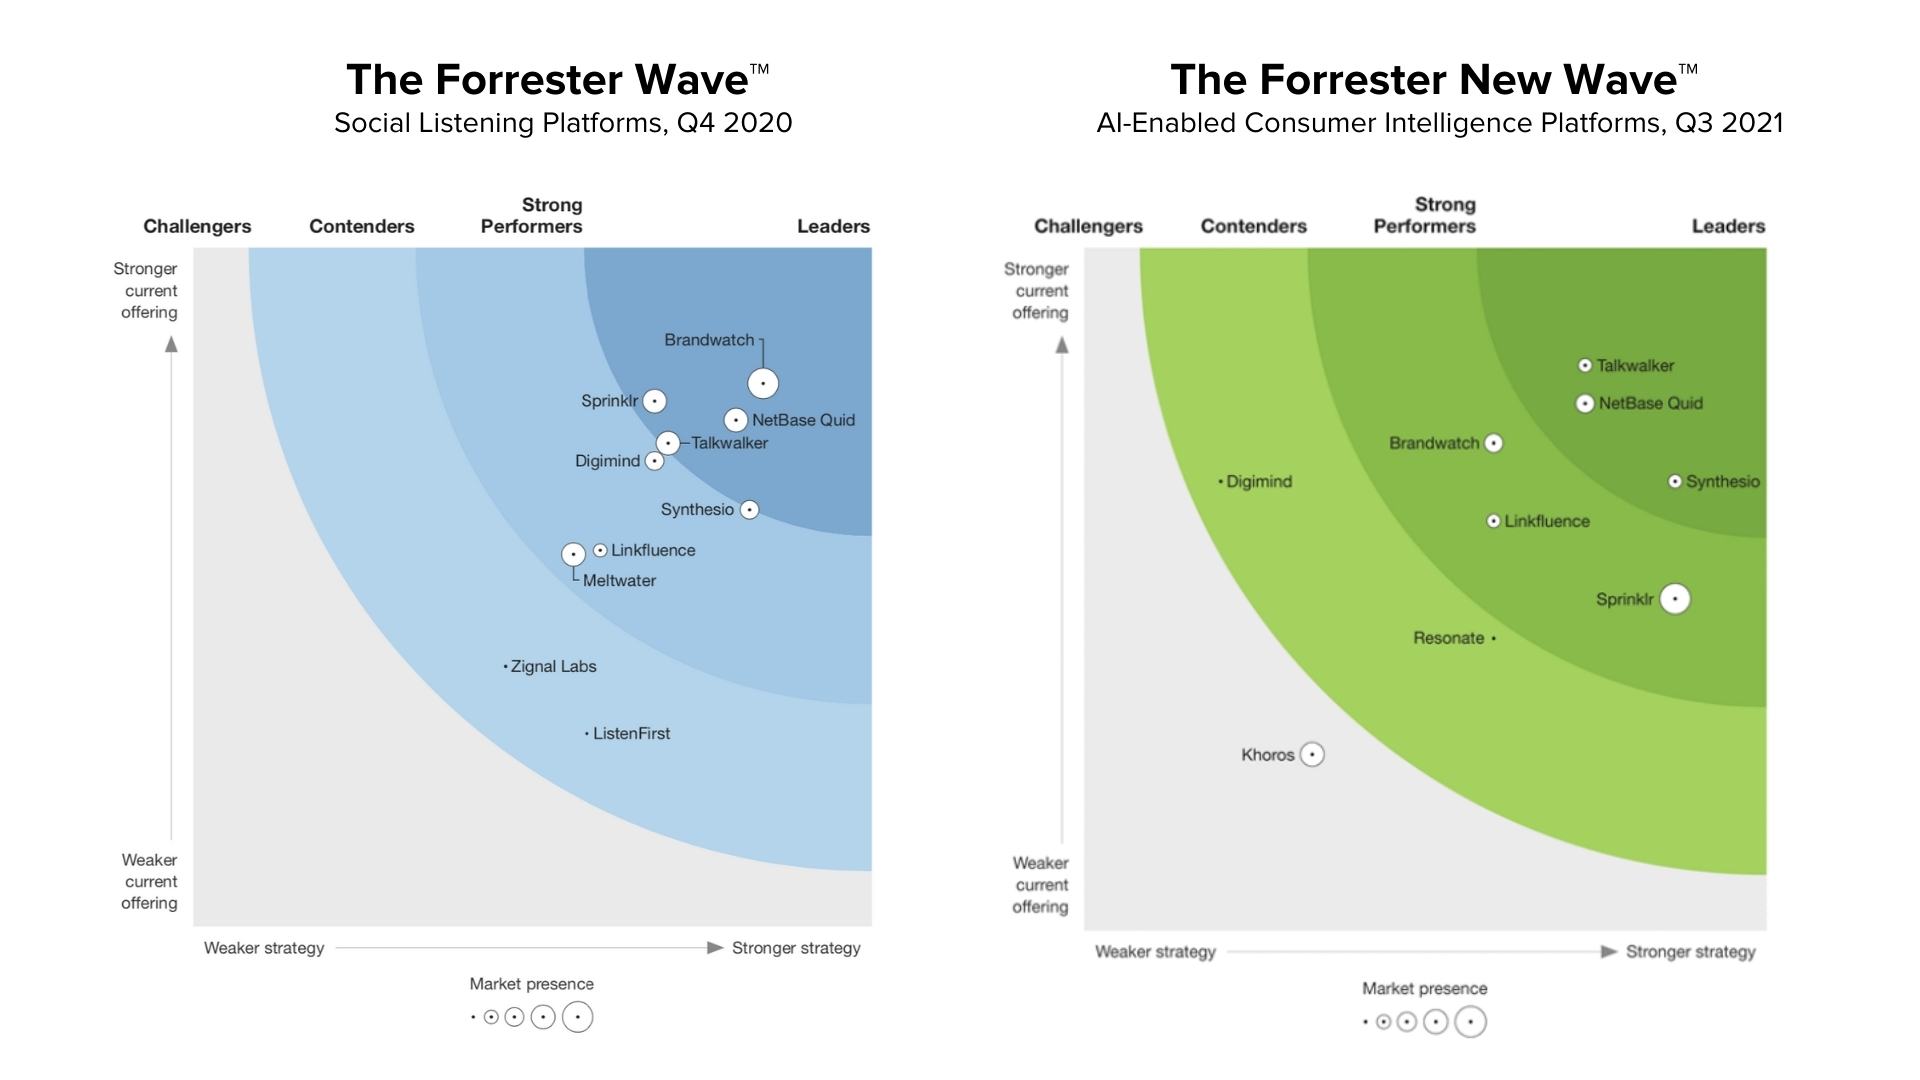 The Forrester New Wave™: AI-Enabled Consumer Intelligence Platforms, Q3 2021